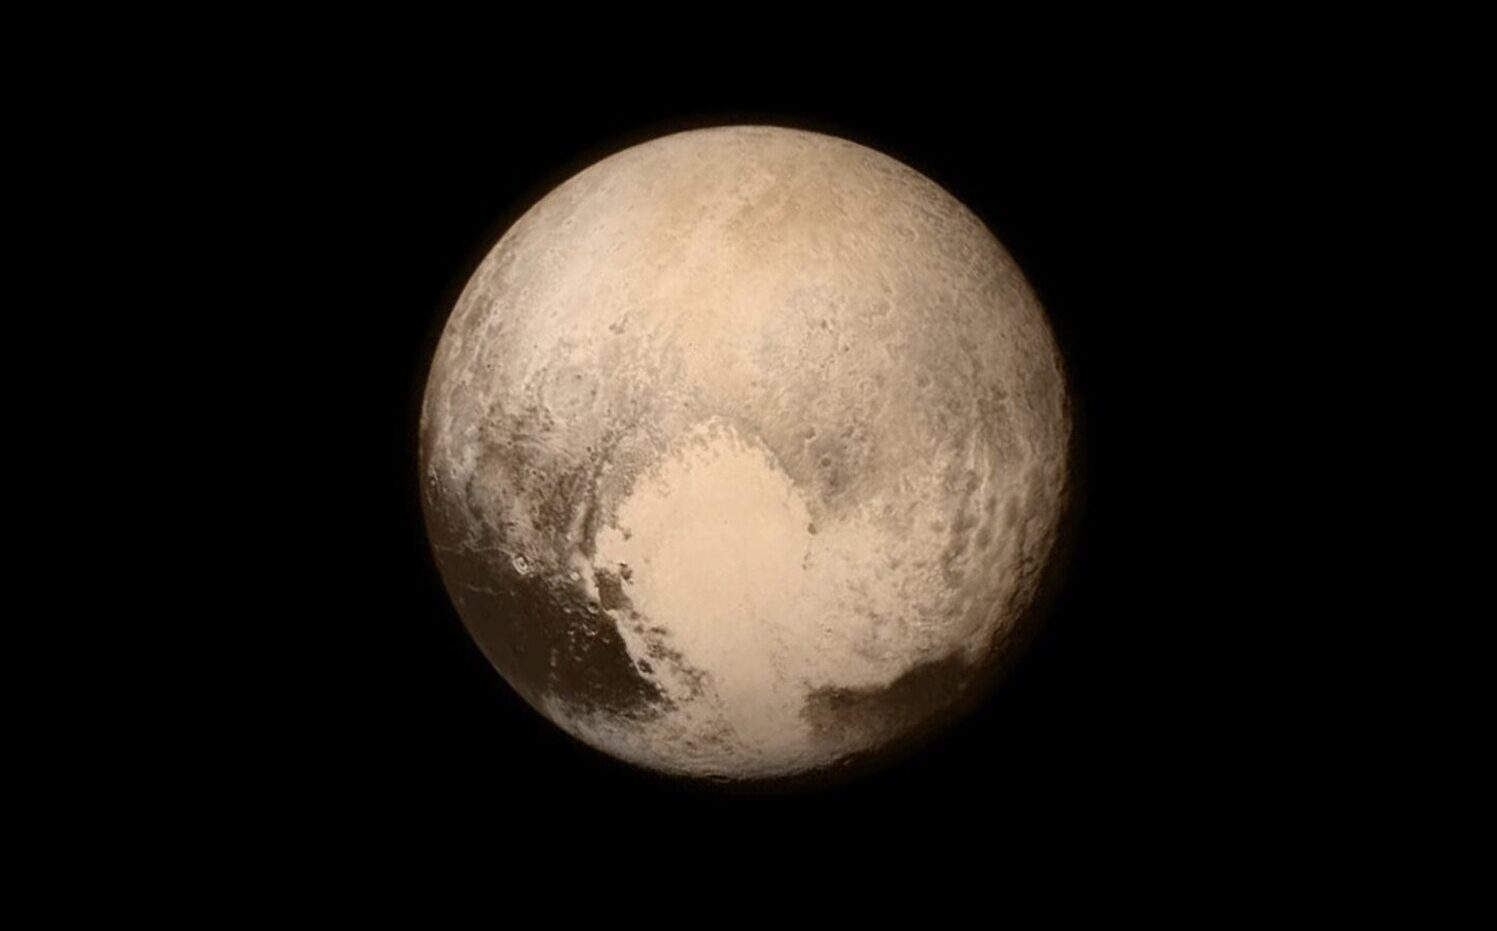 The definition of planet is now being contested, though it means nothing for Pluto, shown above.